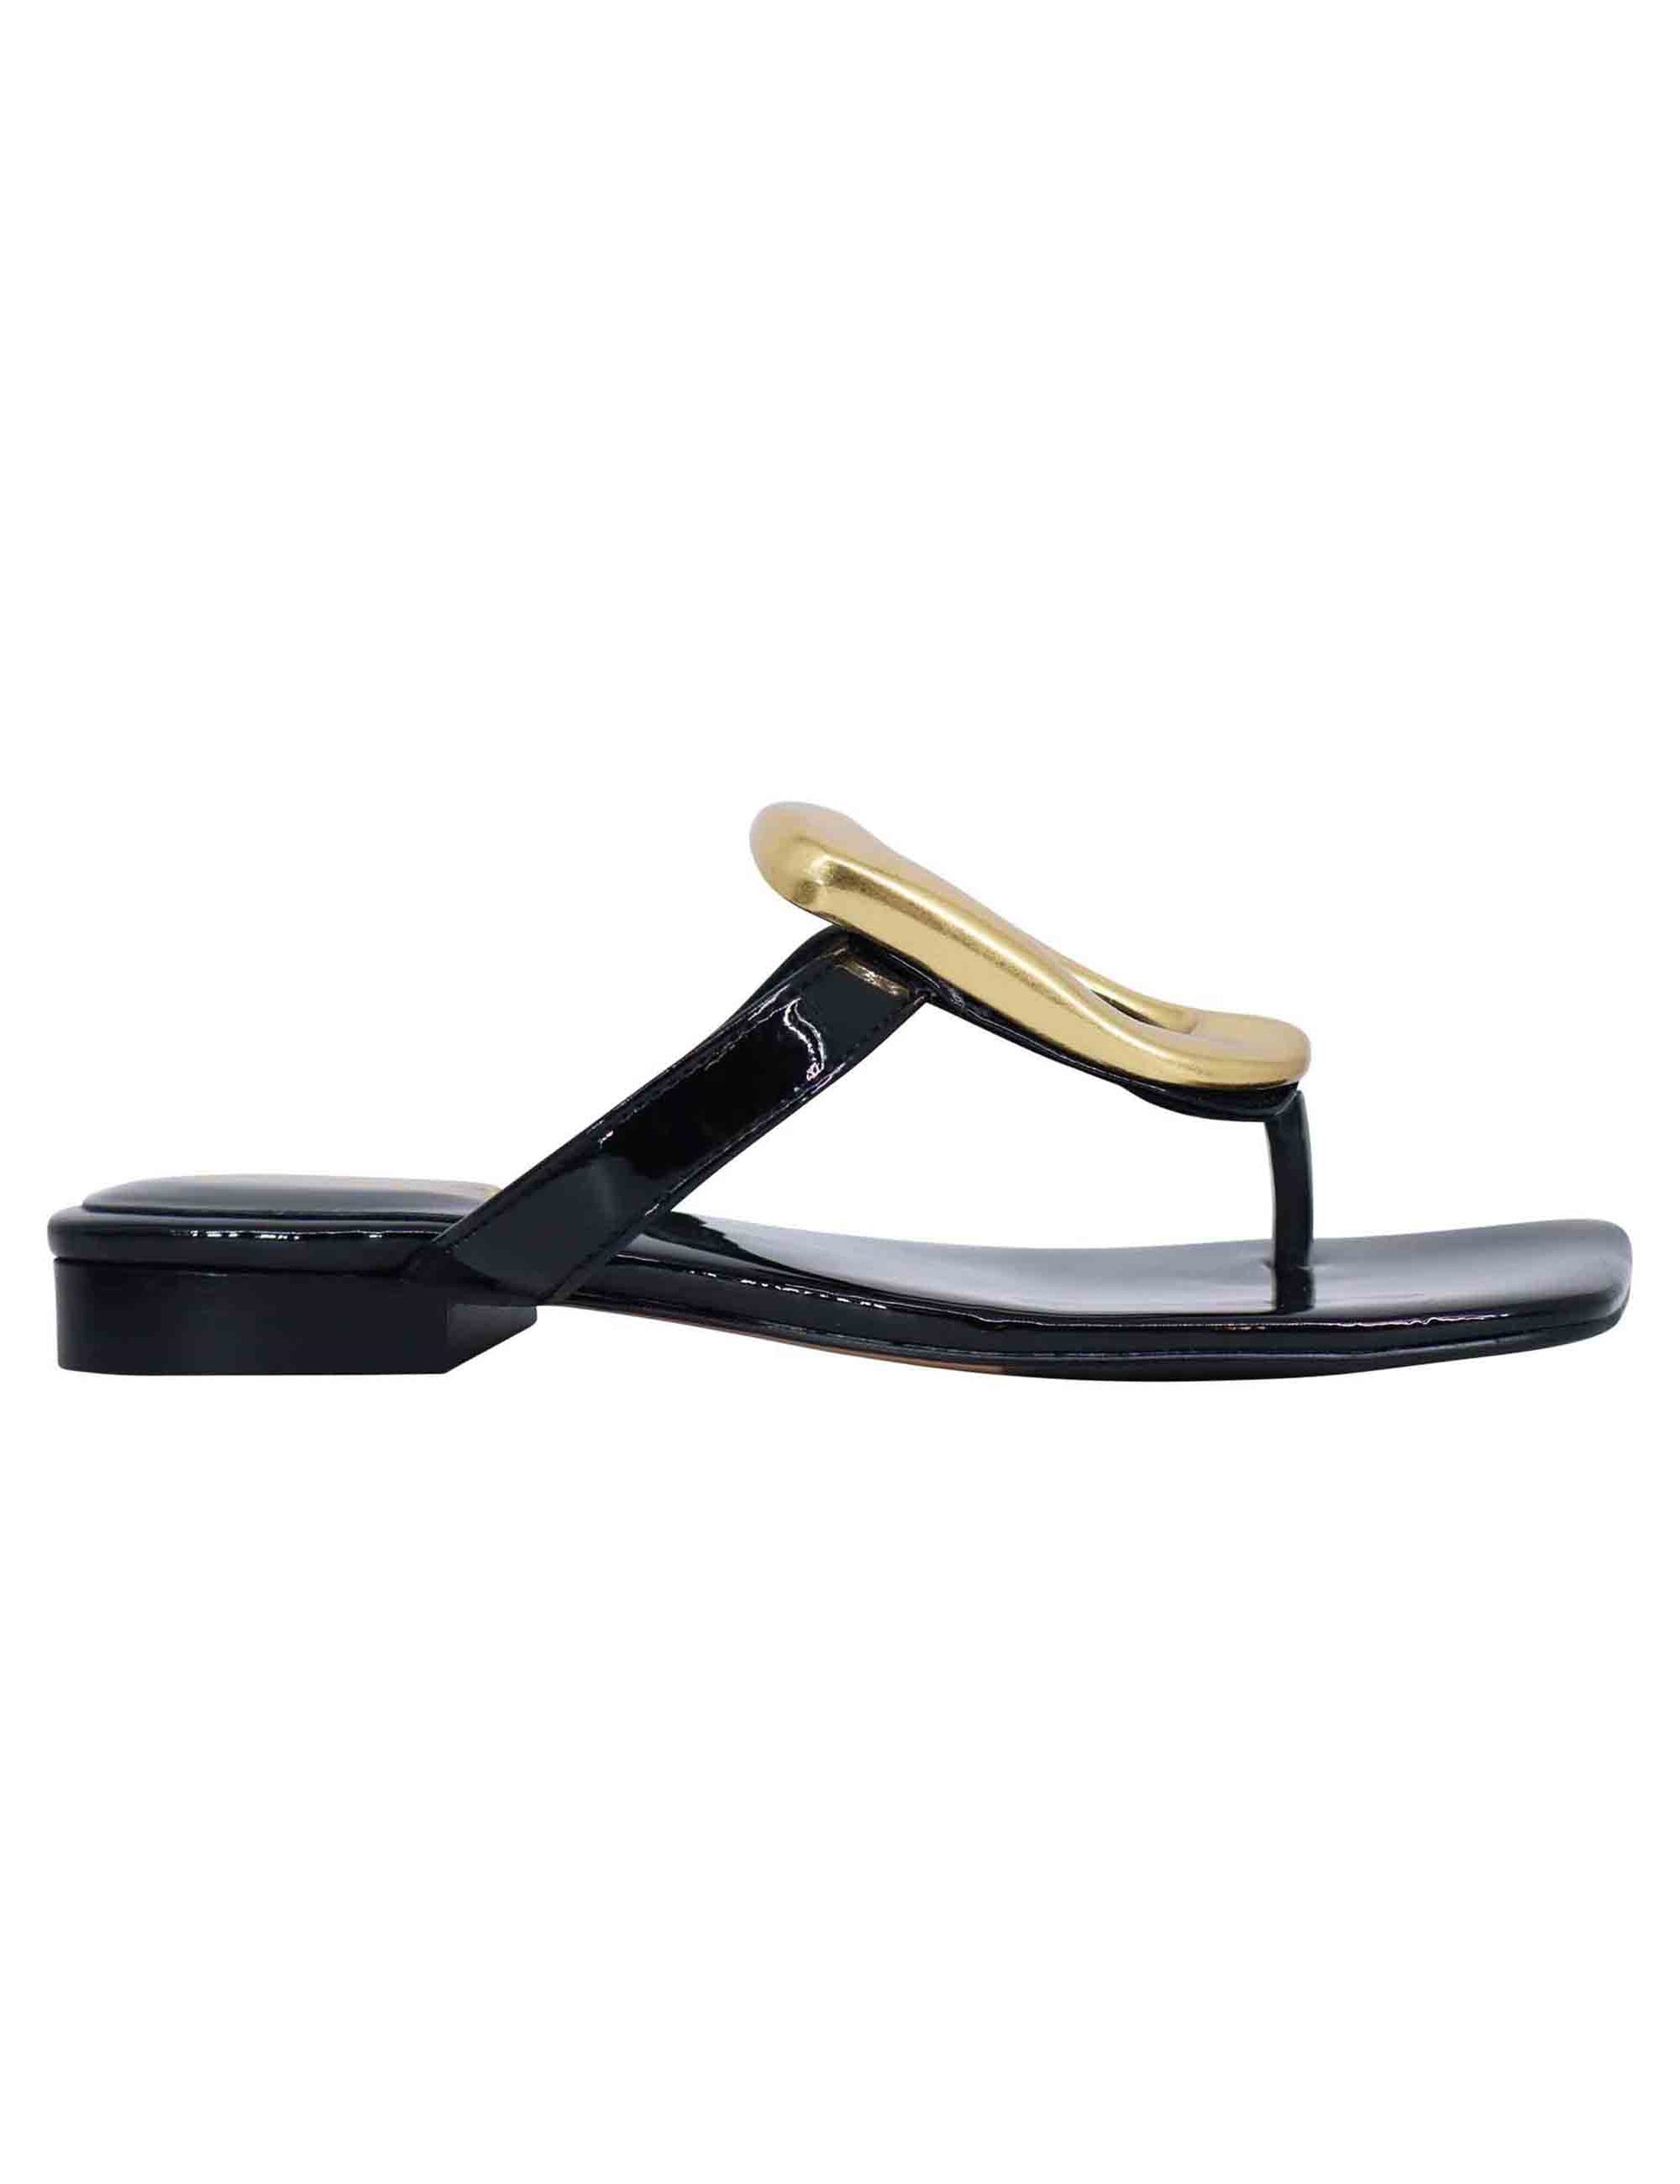 Women's black patent leather thong sandals with low heel and gold accessory